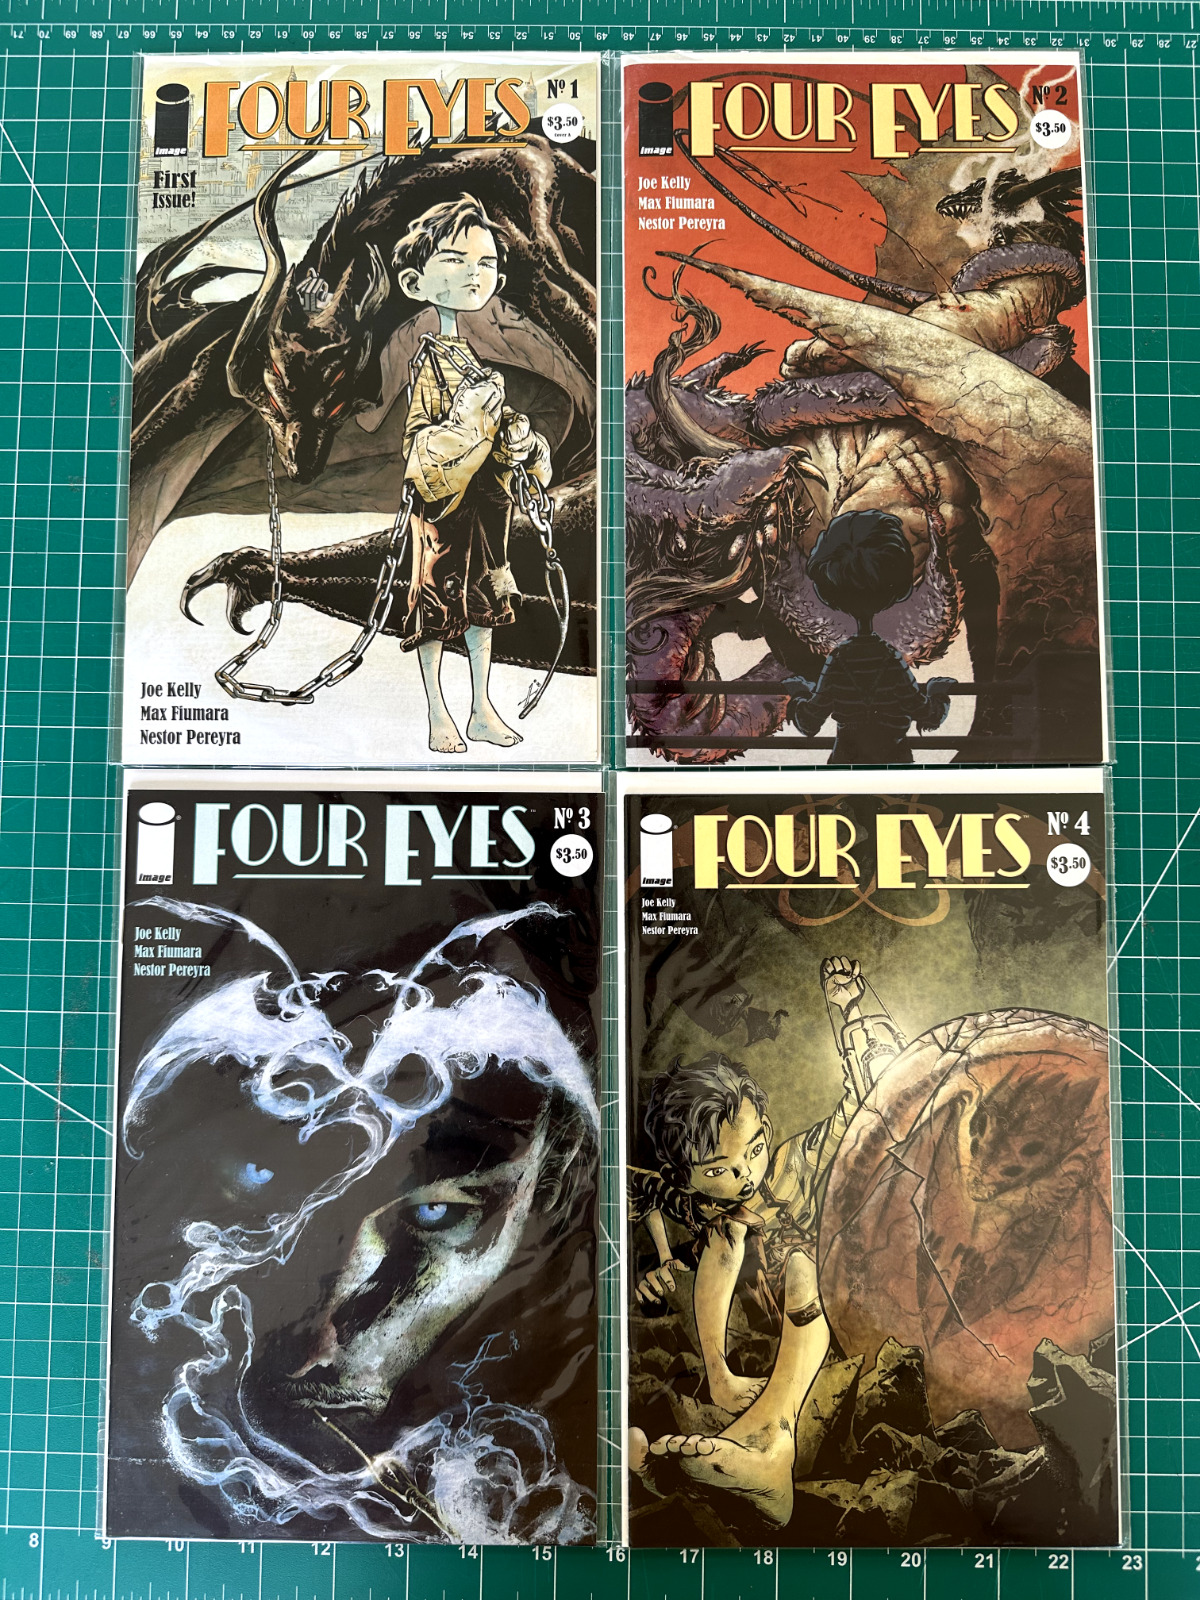 FOUR EYES (IMAGE, 2008) #1-4 -- COMPLETE SERIES